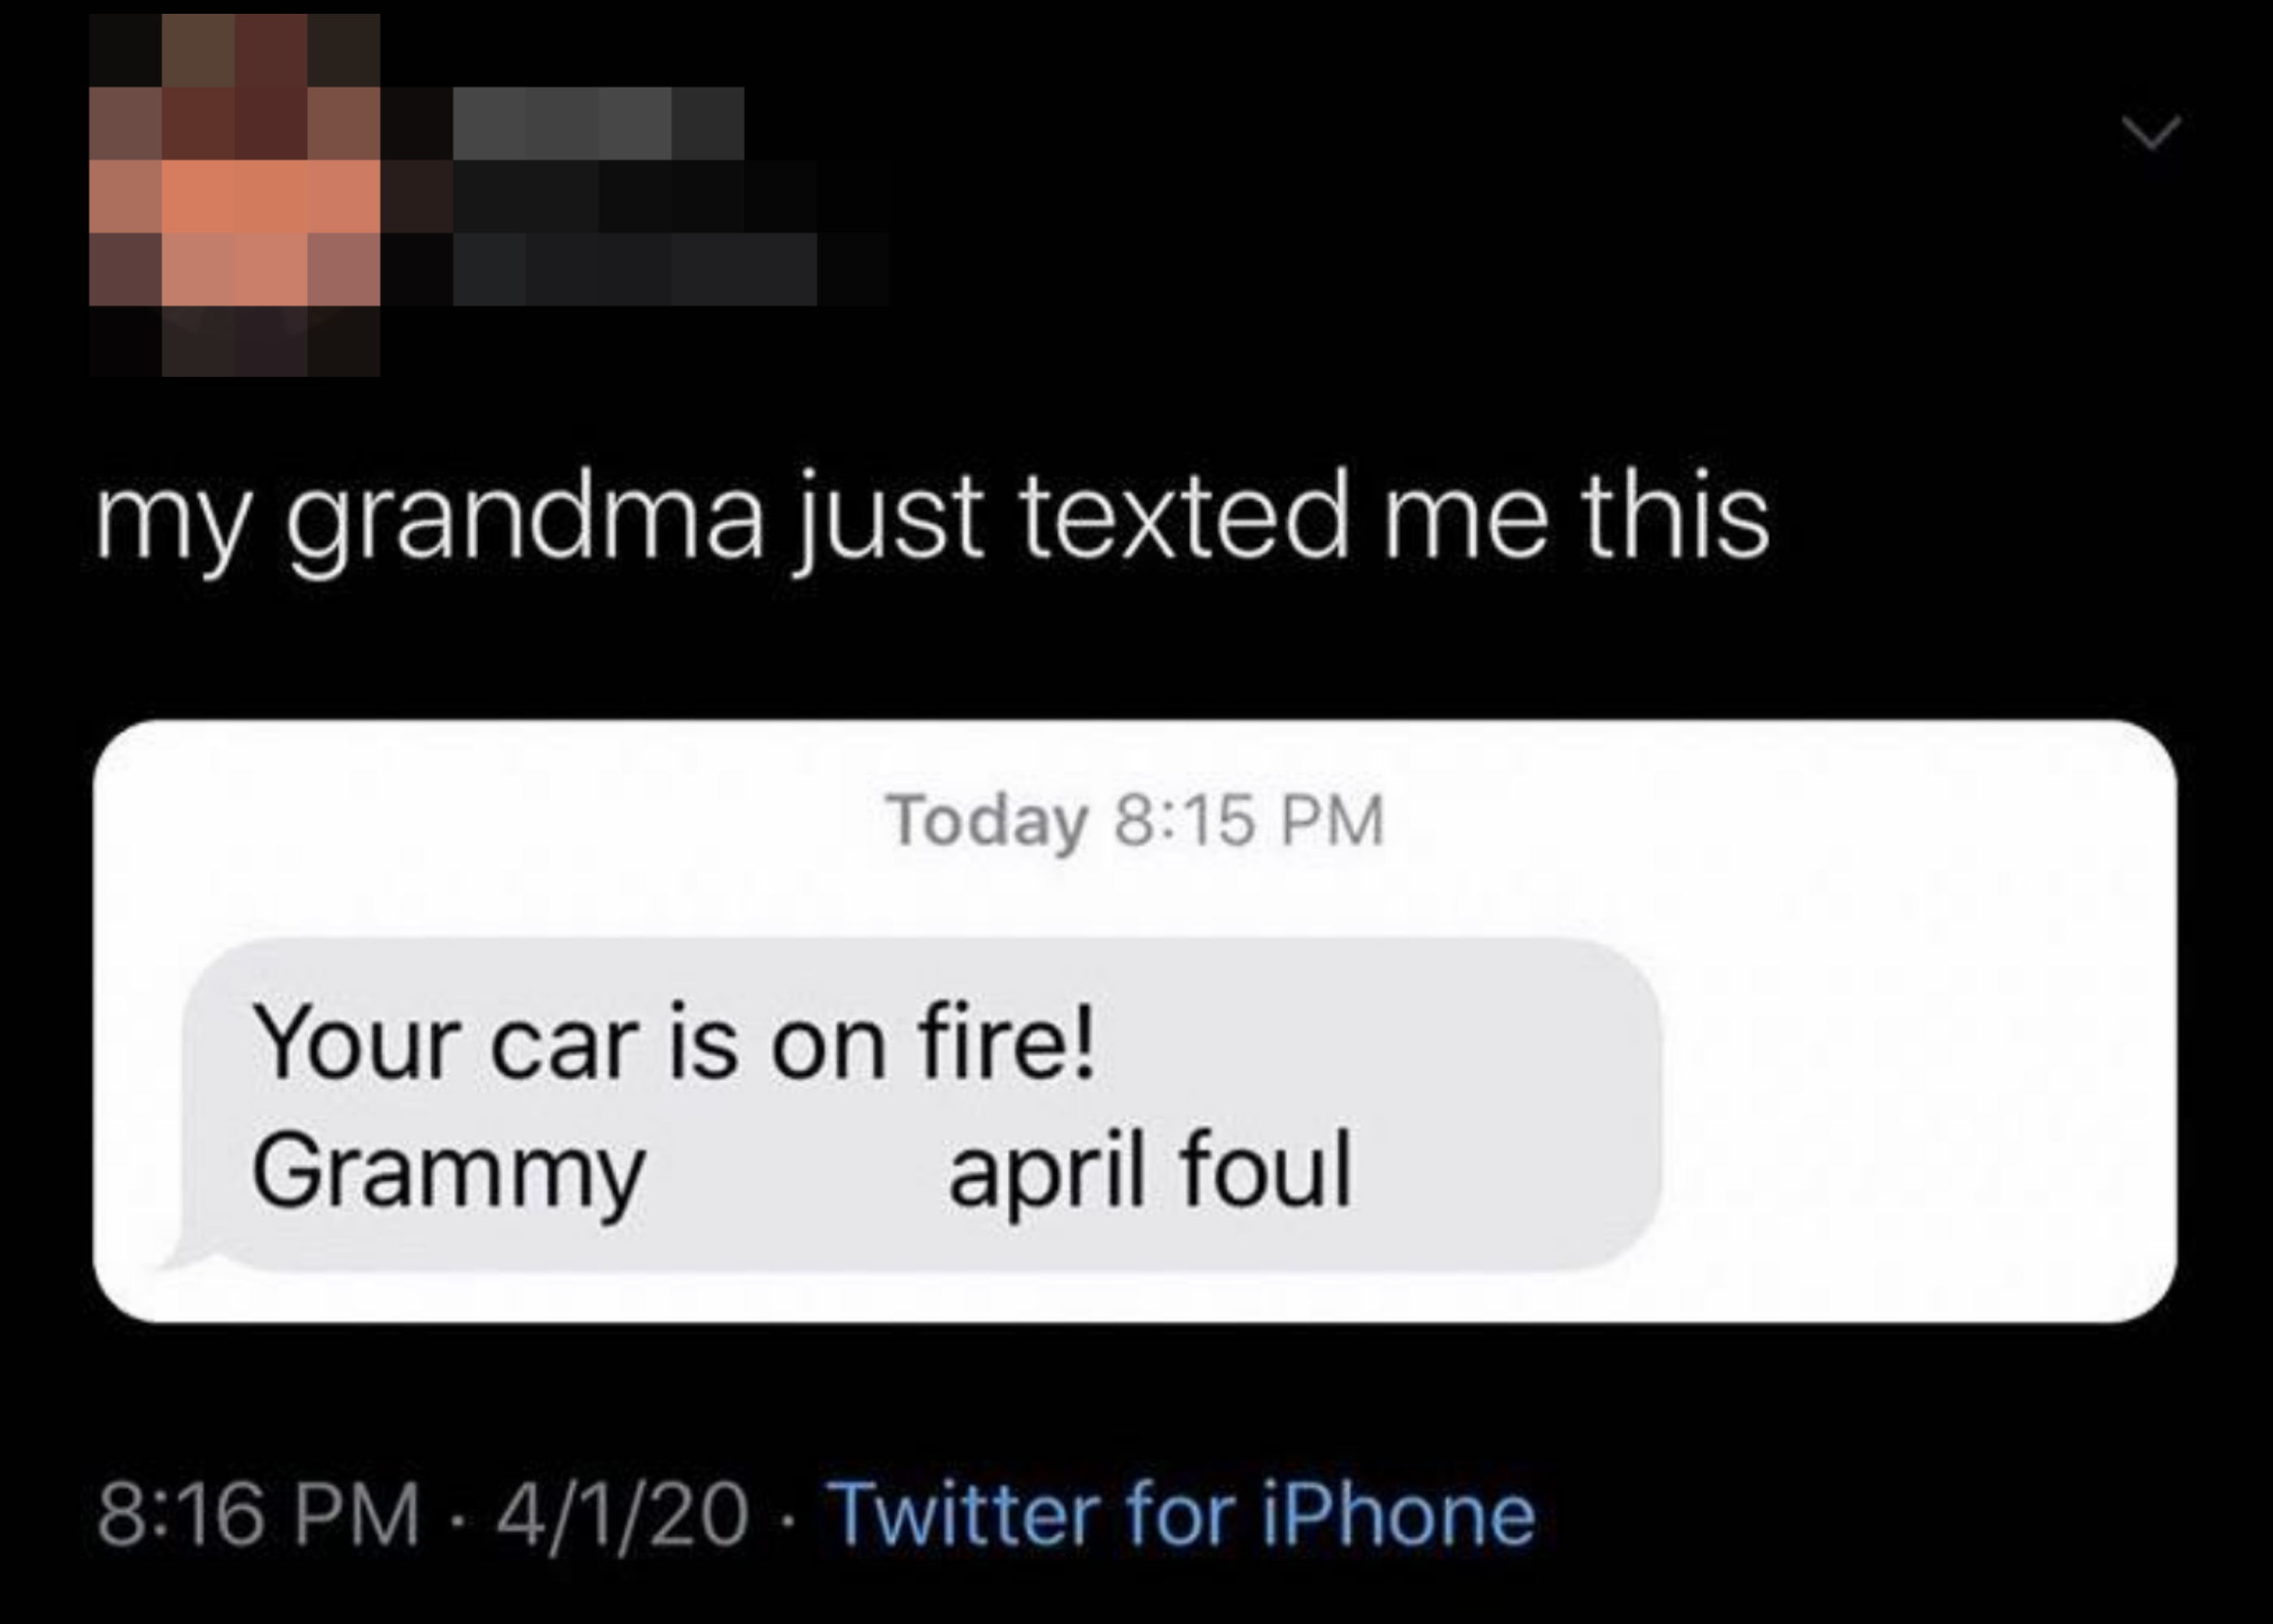 your car is on fire, april foul